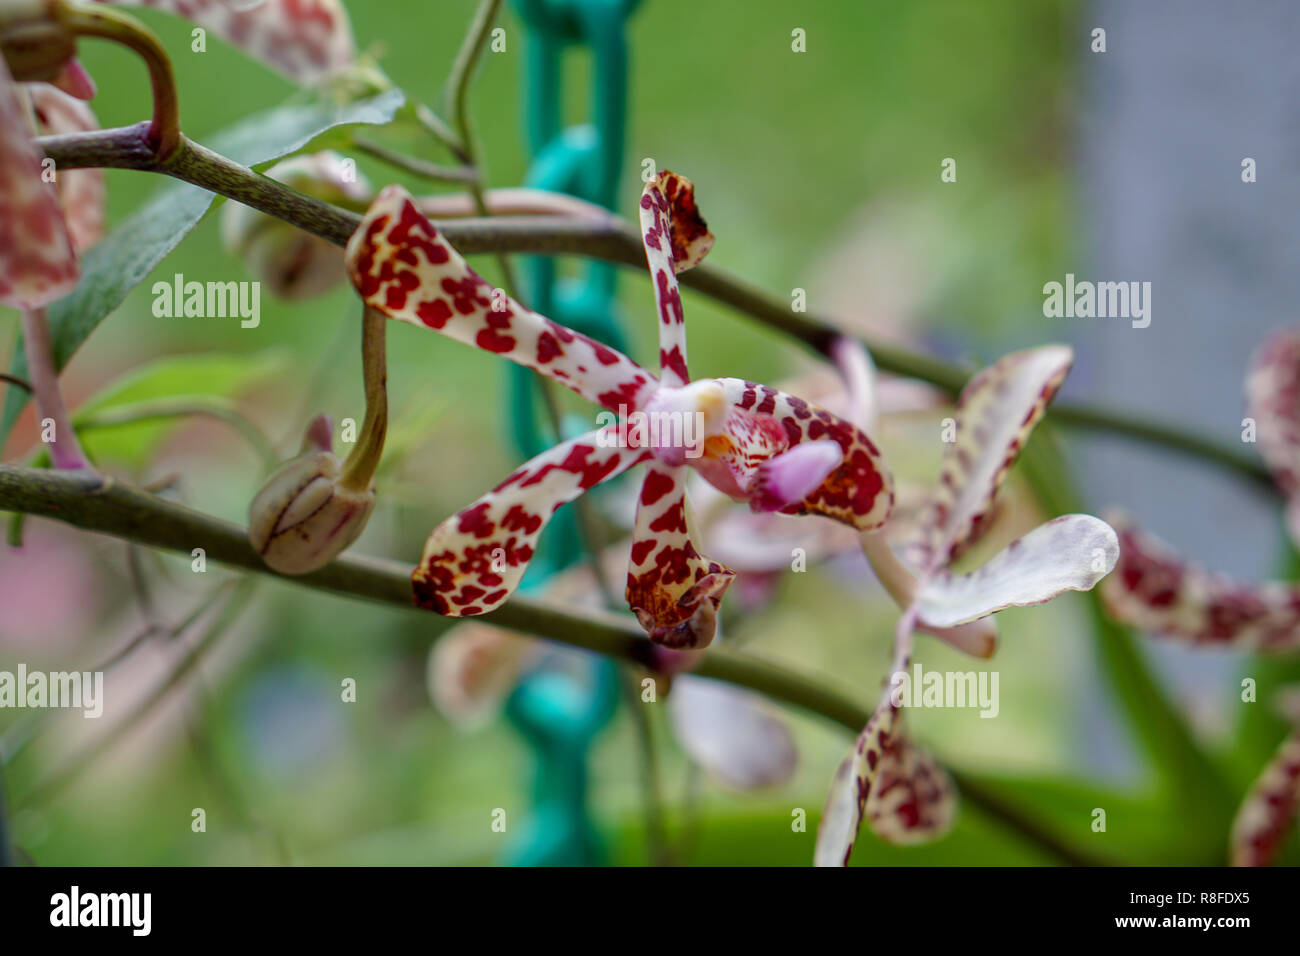 Yellow orchids Flower with Red Dots Stock Photo